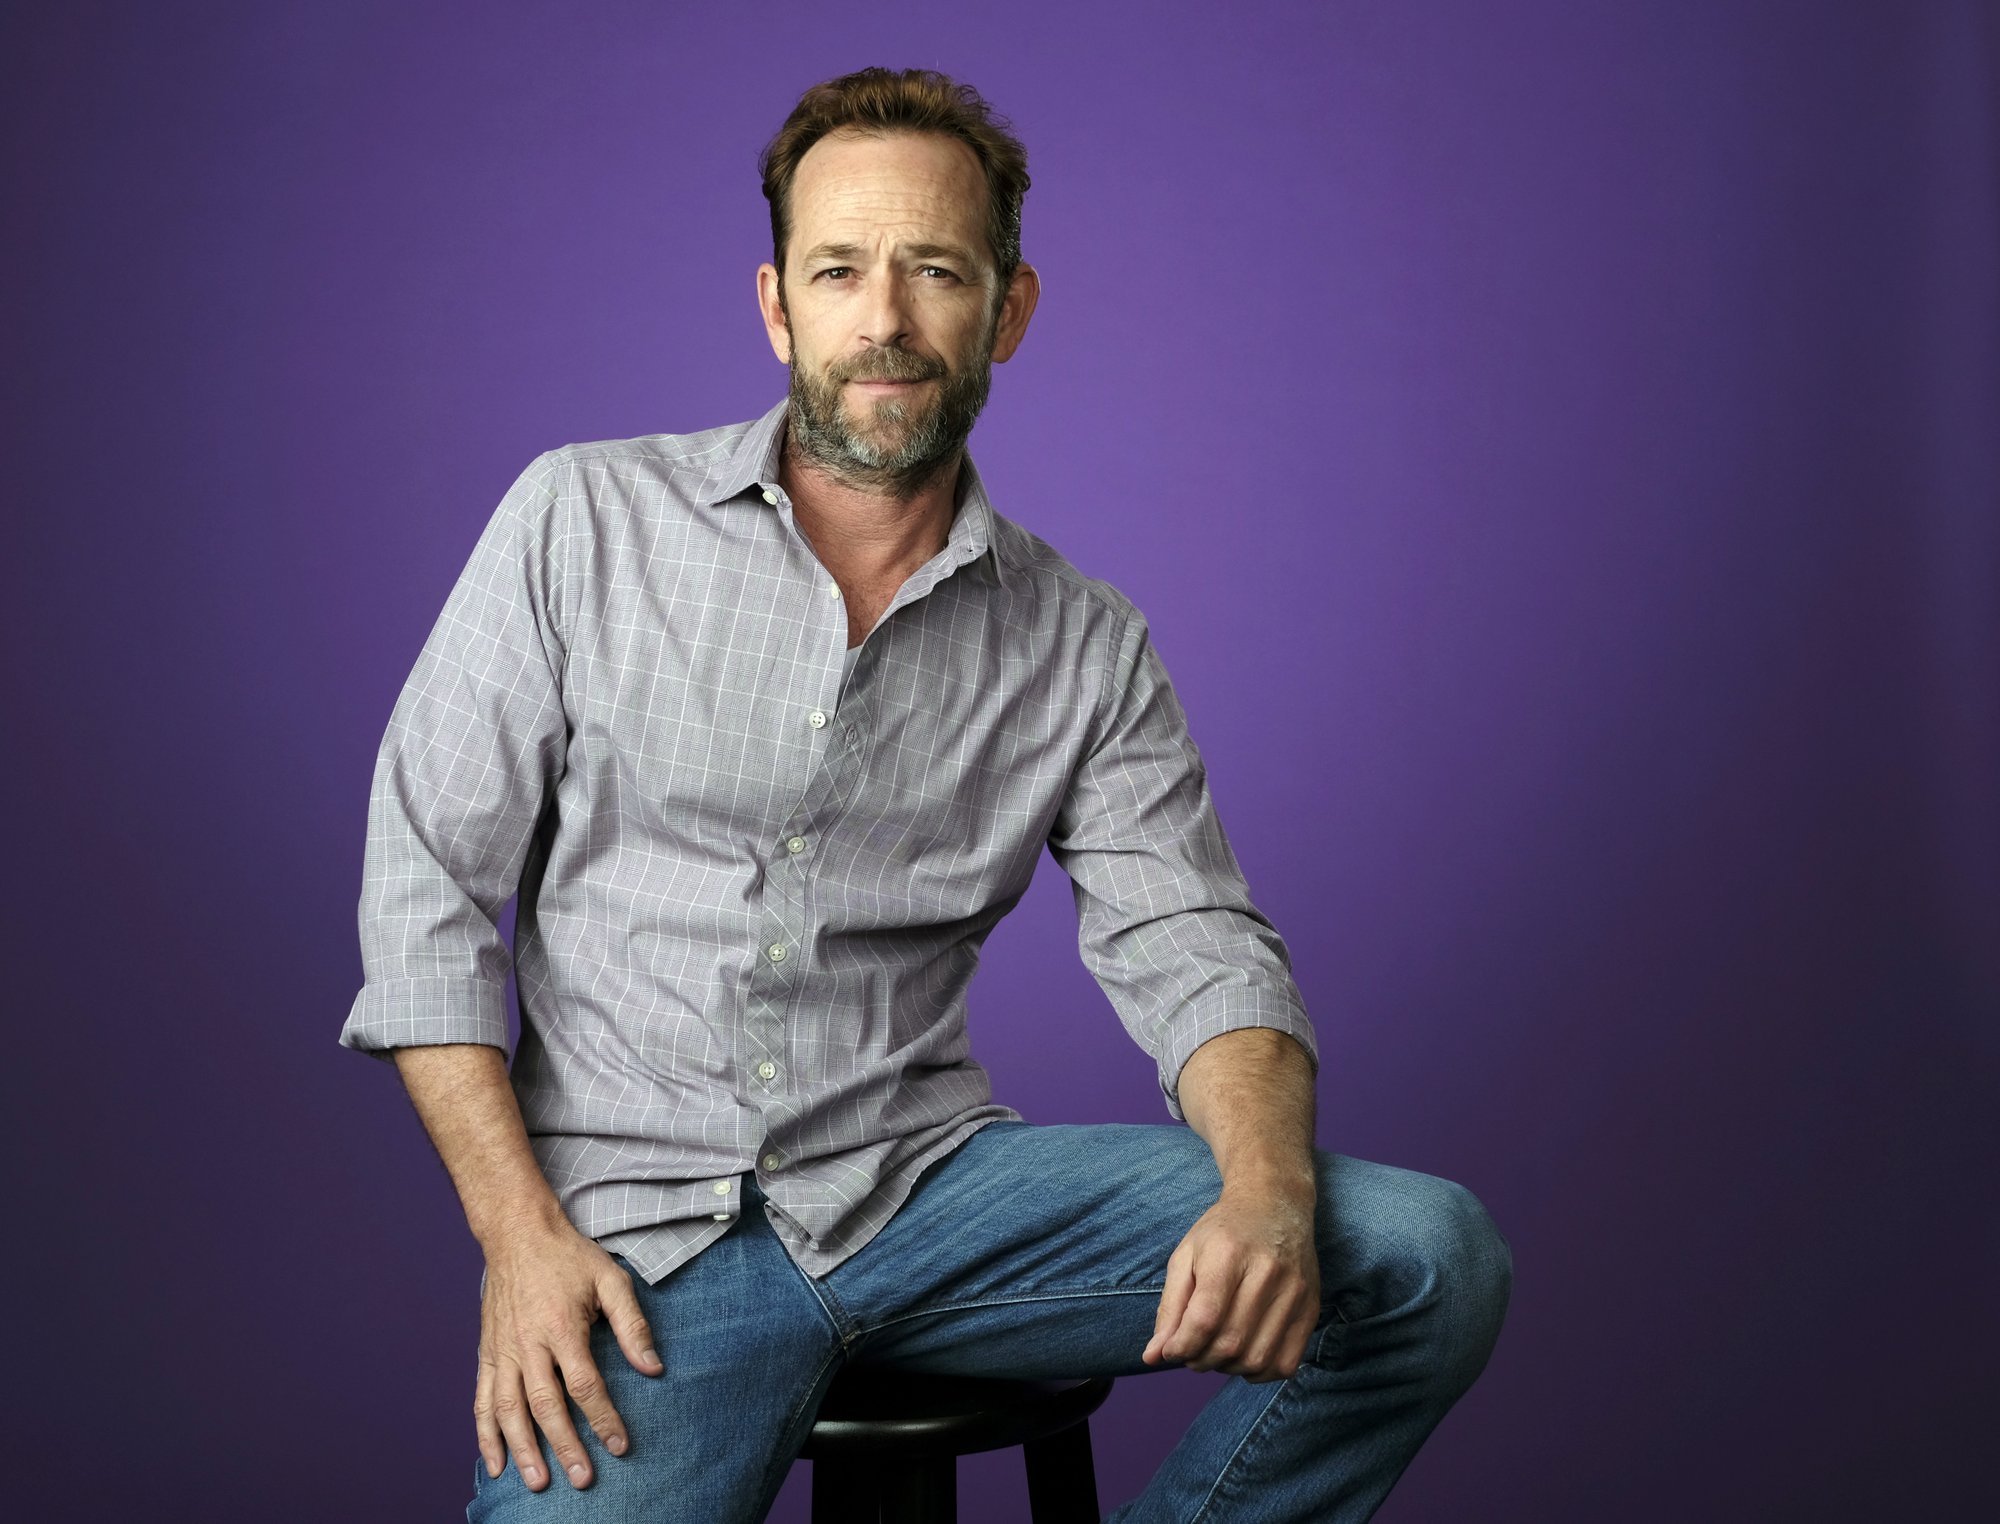 FILE - In this Aug. 6, 2018, file photo, Luke Perry poses for a portrait during the 2018 Television Critics Association Summer Press Tour in Beverly Hills, California. Photo: AP